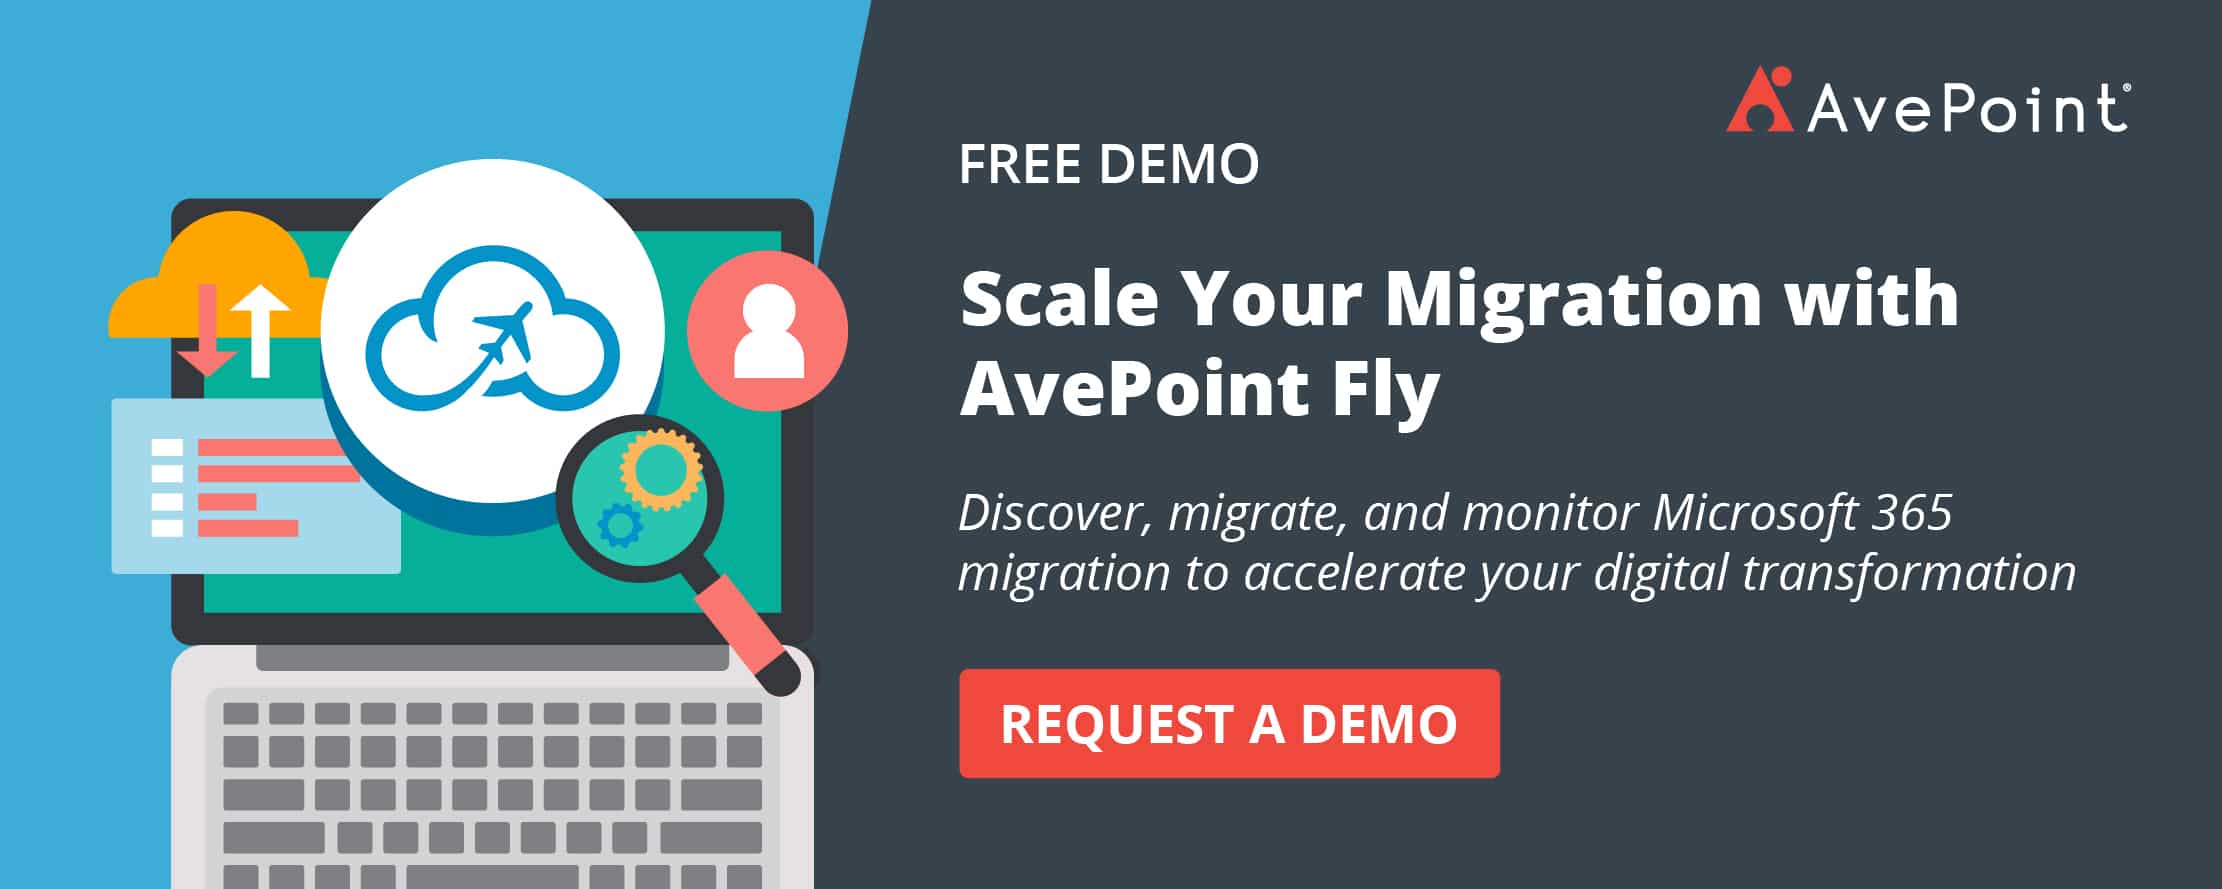 avepoint-fly-cloud-migration